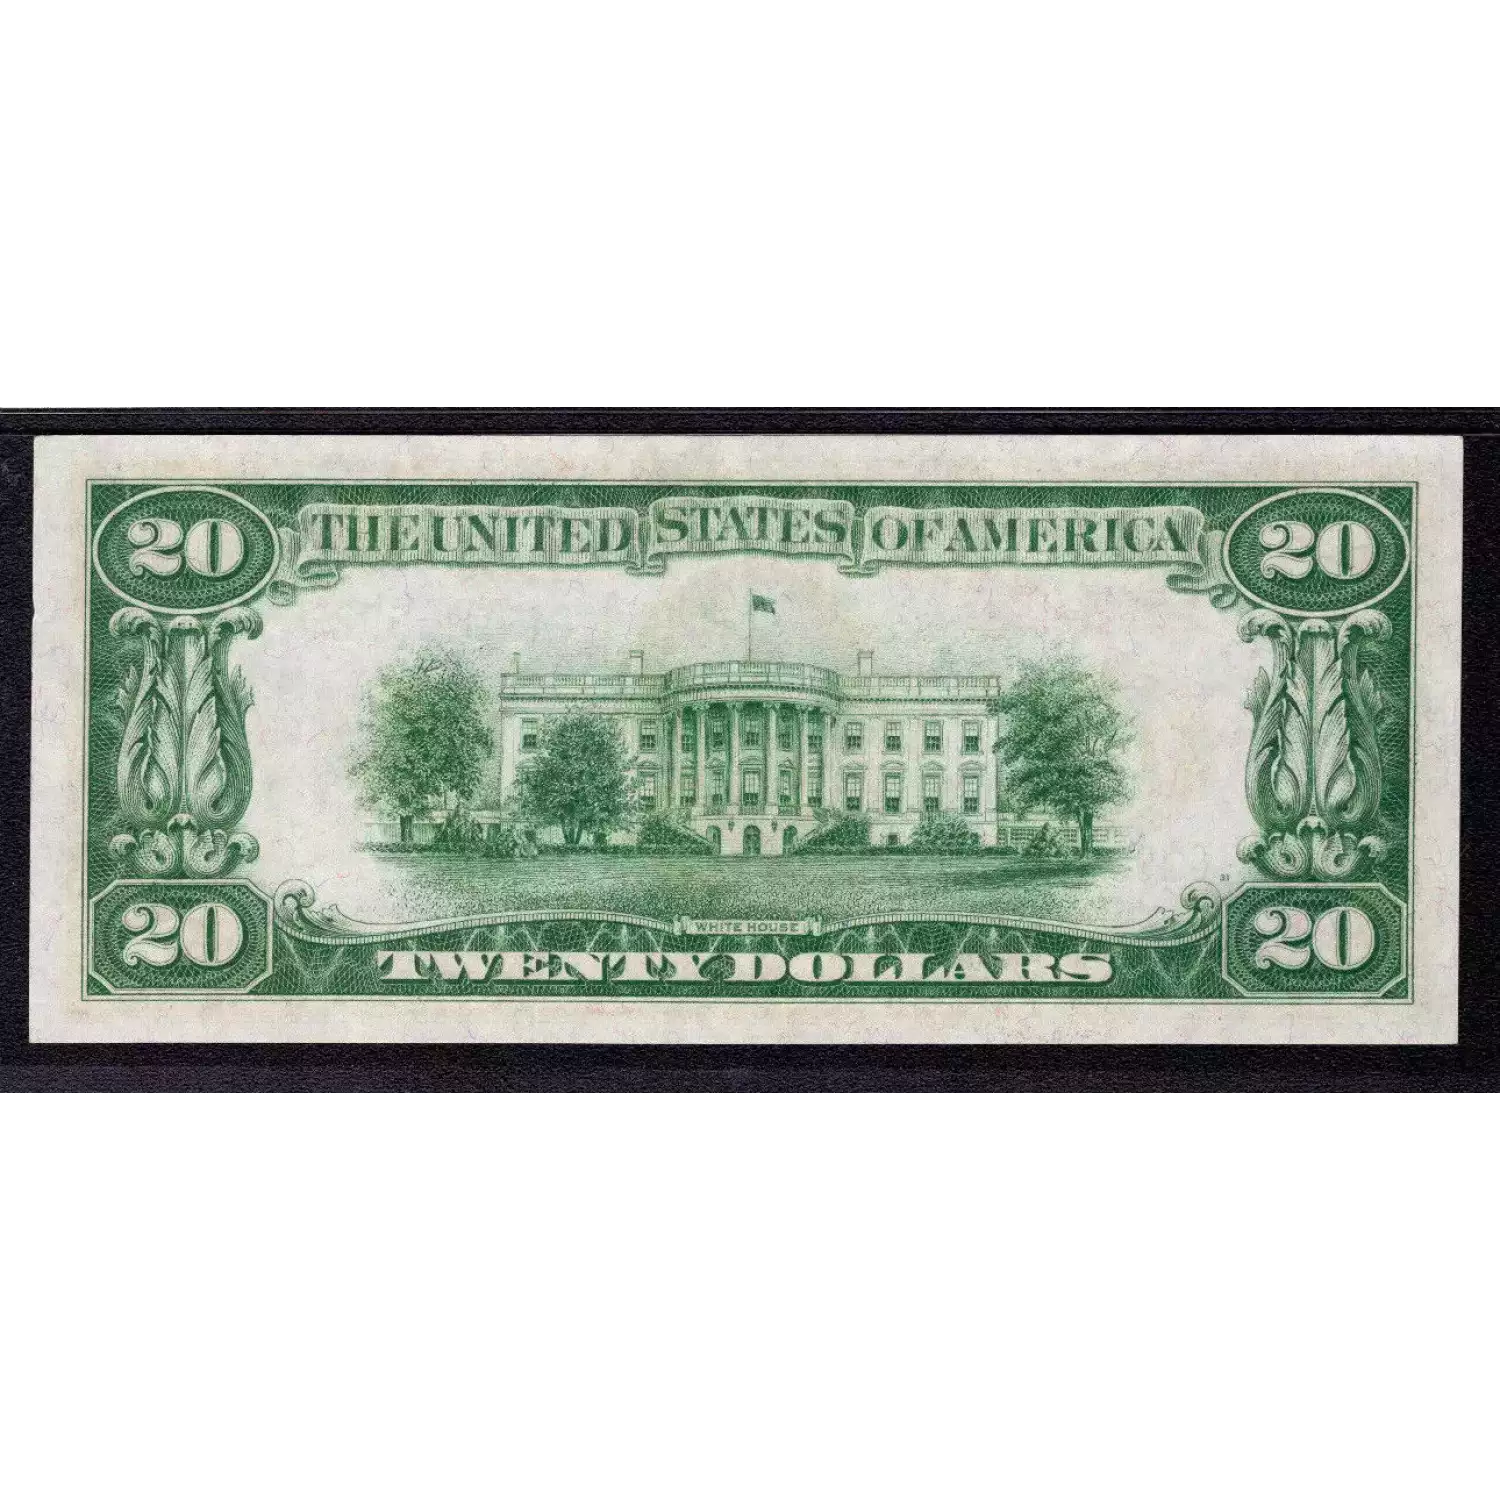 $20 1928-B. Green seal. Small Size $20 Federal Reserve Notes 2052-G (4)